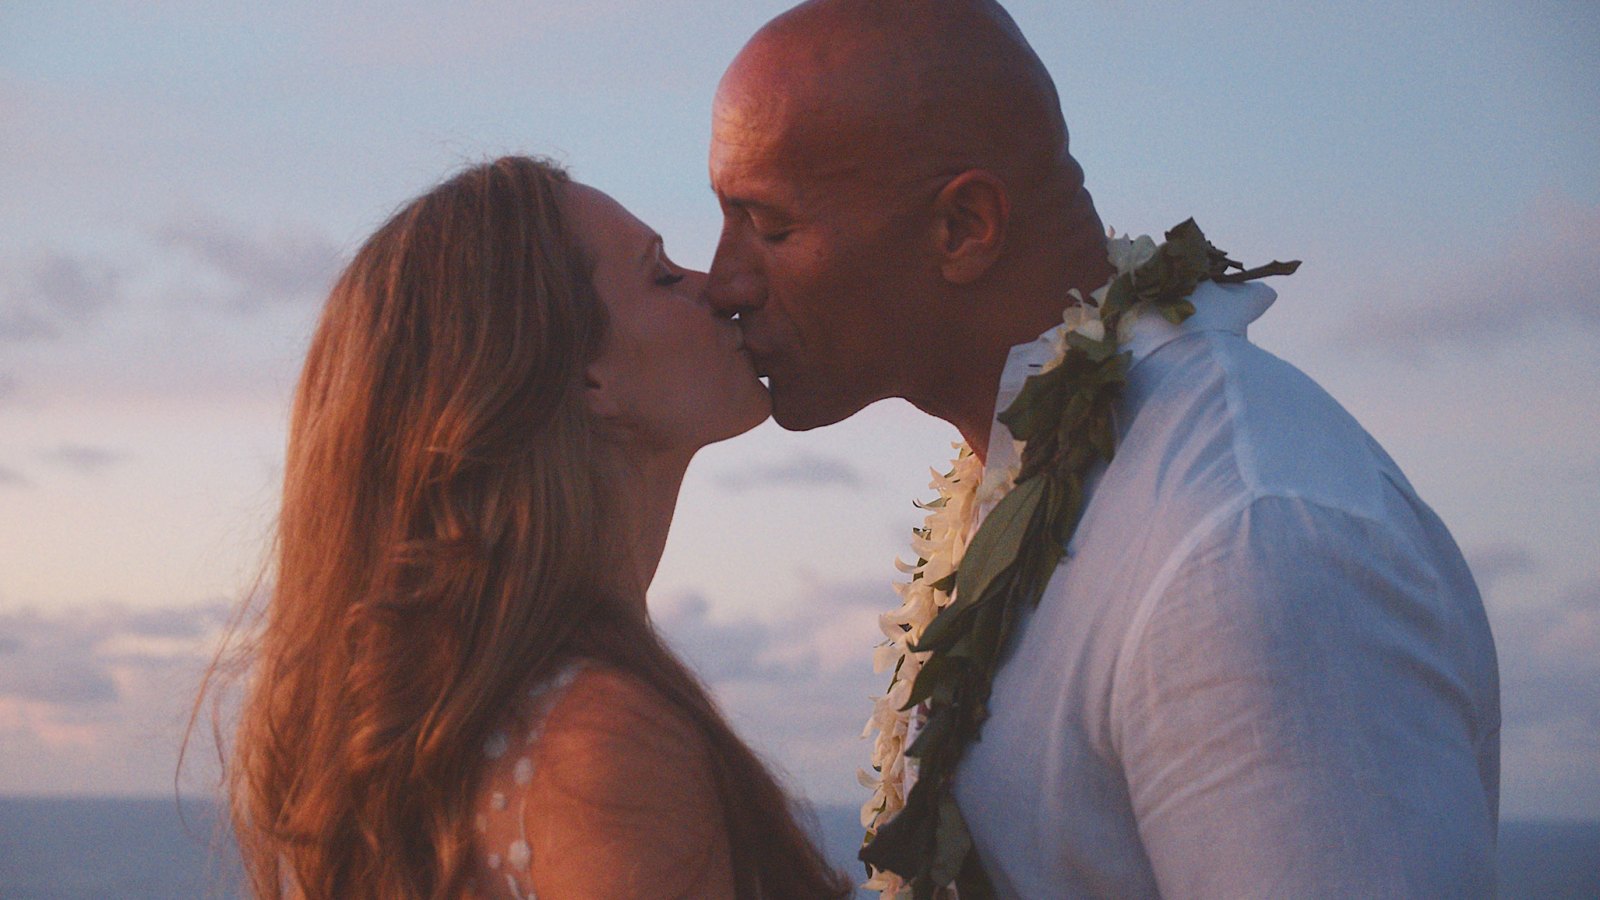 Lauren Hashian Releases Song She Surprised Dwayne ‘The Rock’ Johnson With on Their Wedding Day